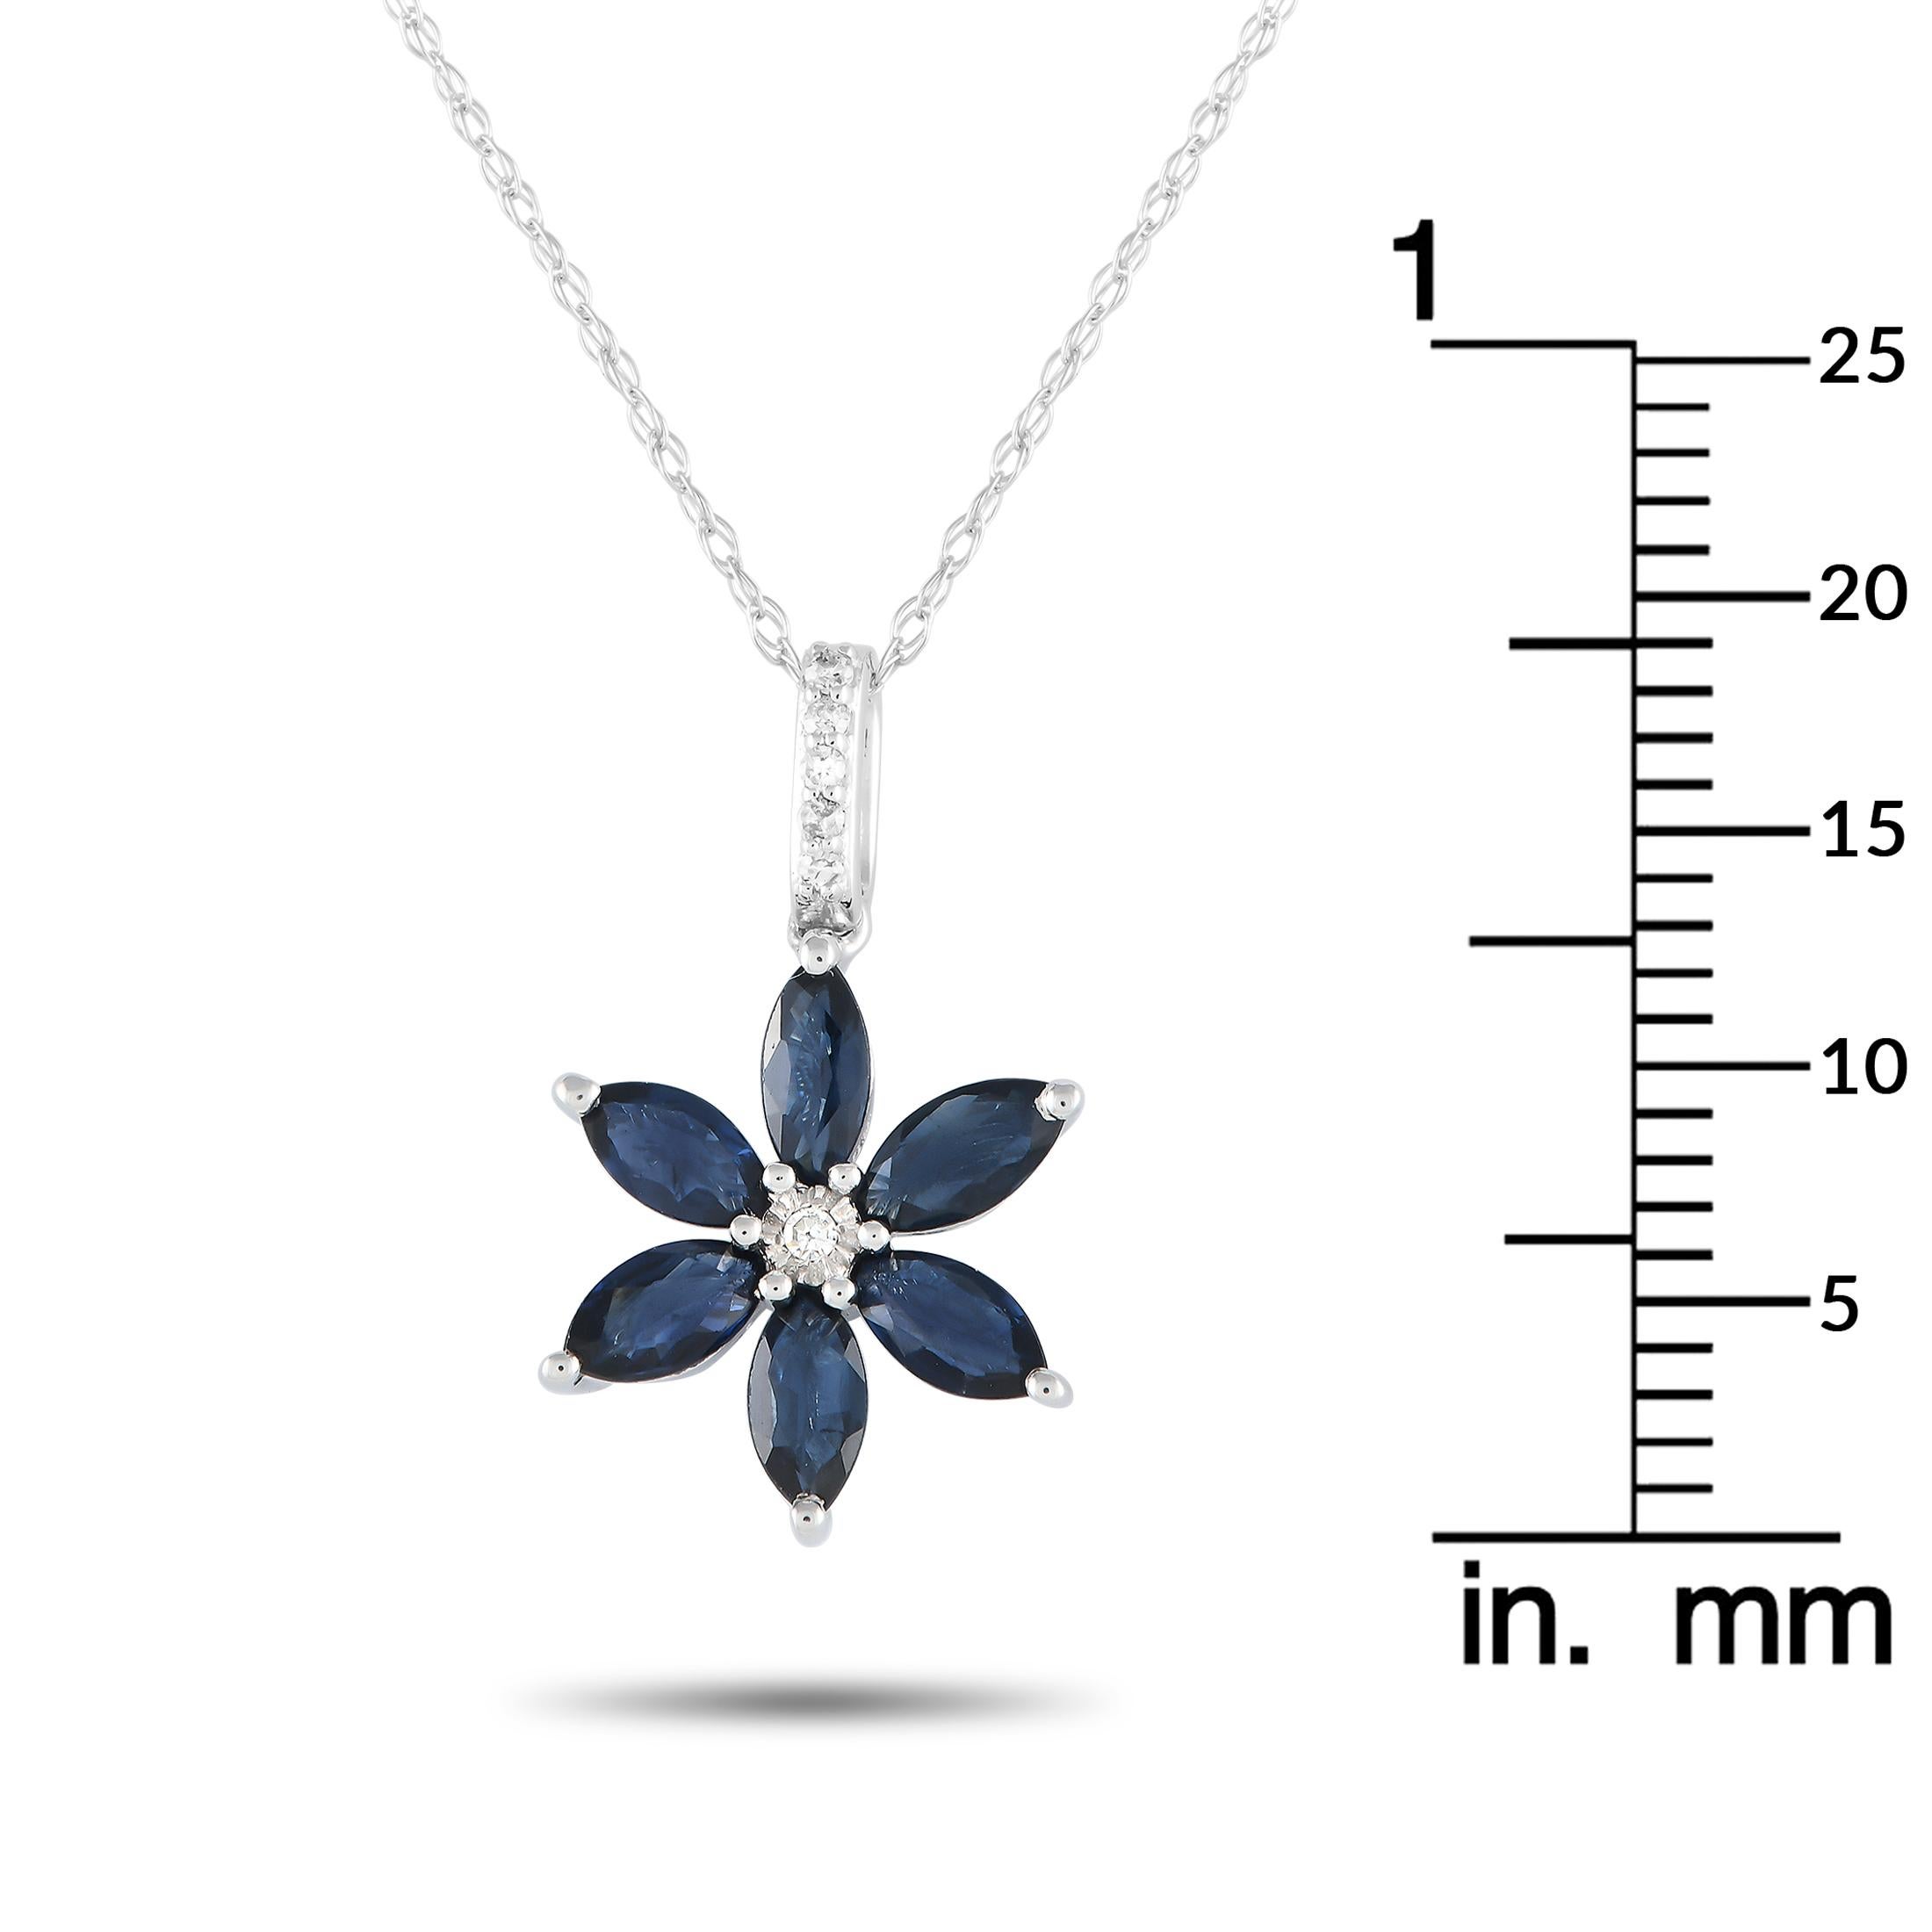 LB Exclusive 14K White Gold 0.01 ct Diamond Flower Necklace PD4-16241WSA In New Condition For Sale In Southampton, PA